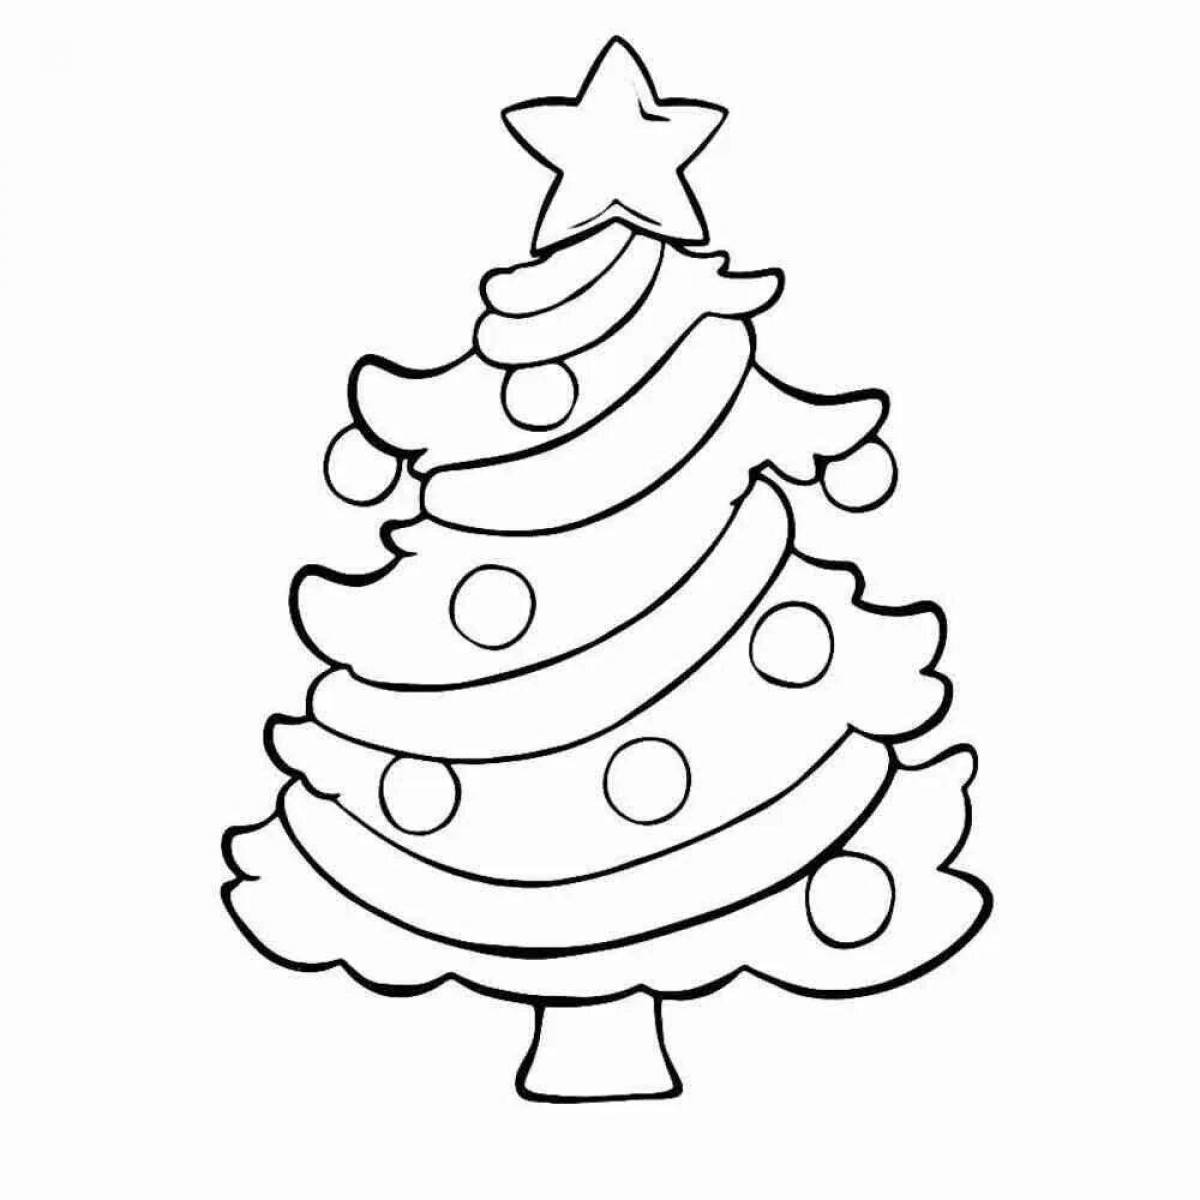 Christmas tree coloring book for girls